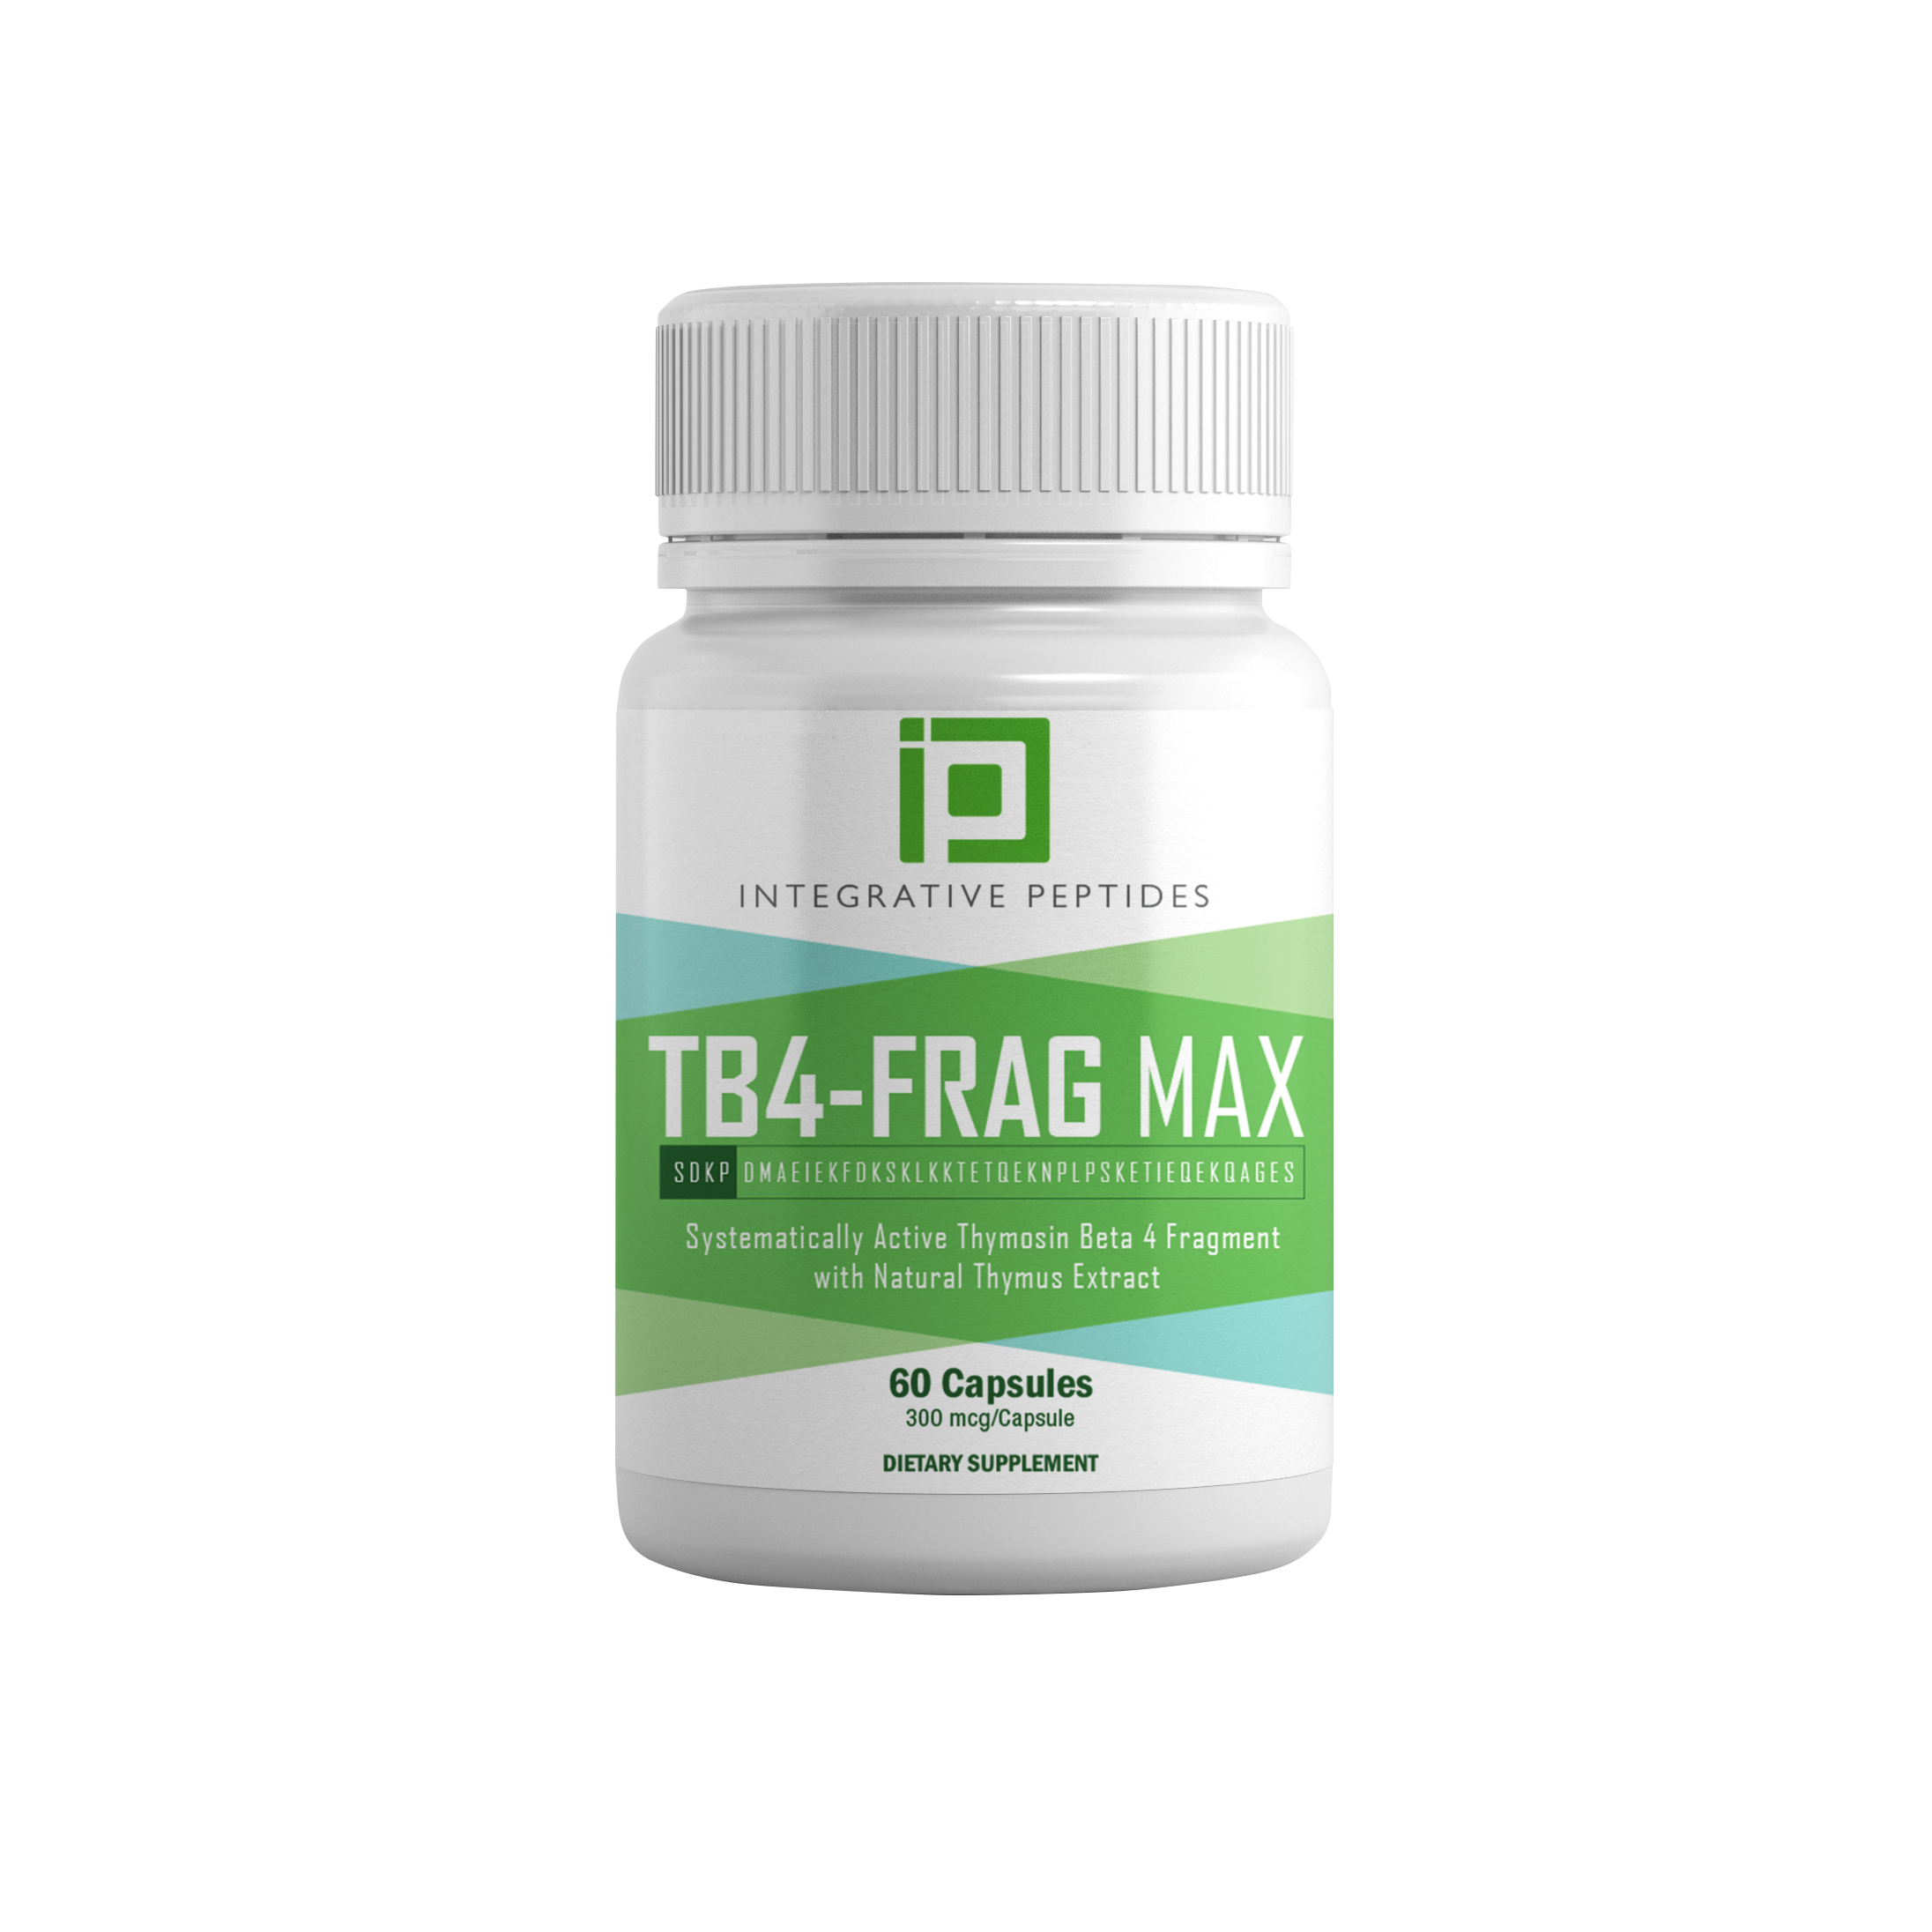 TB4-FRAG MAX FROM INTEGRATIVE PEPTIDES (60 CAPSULES)